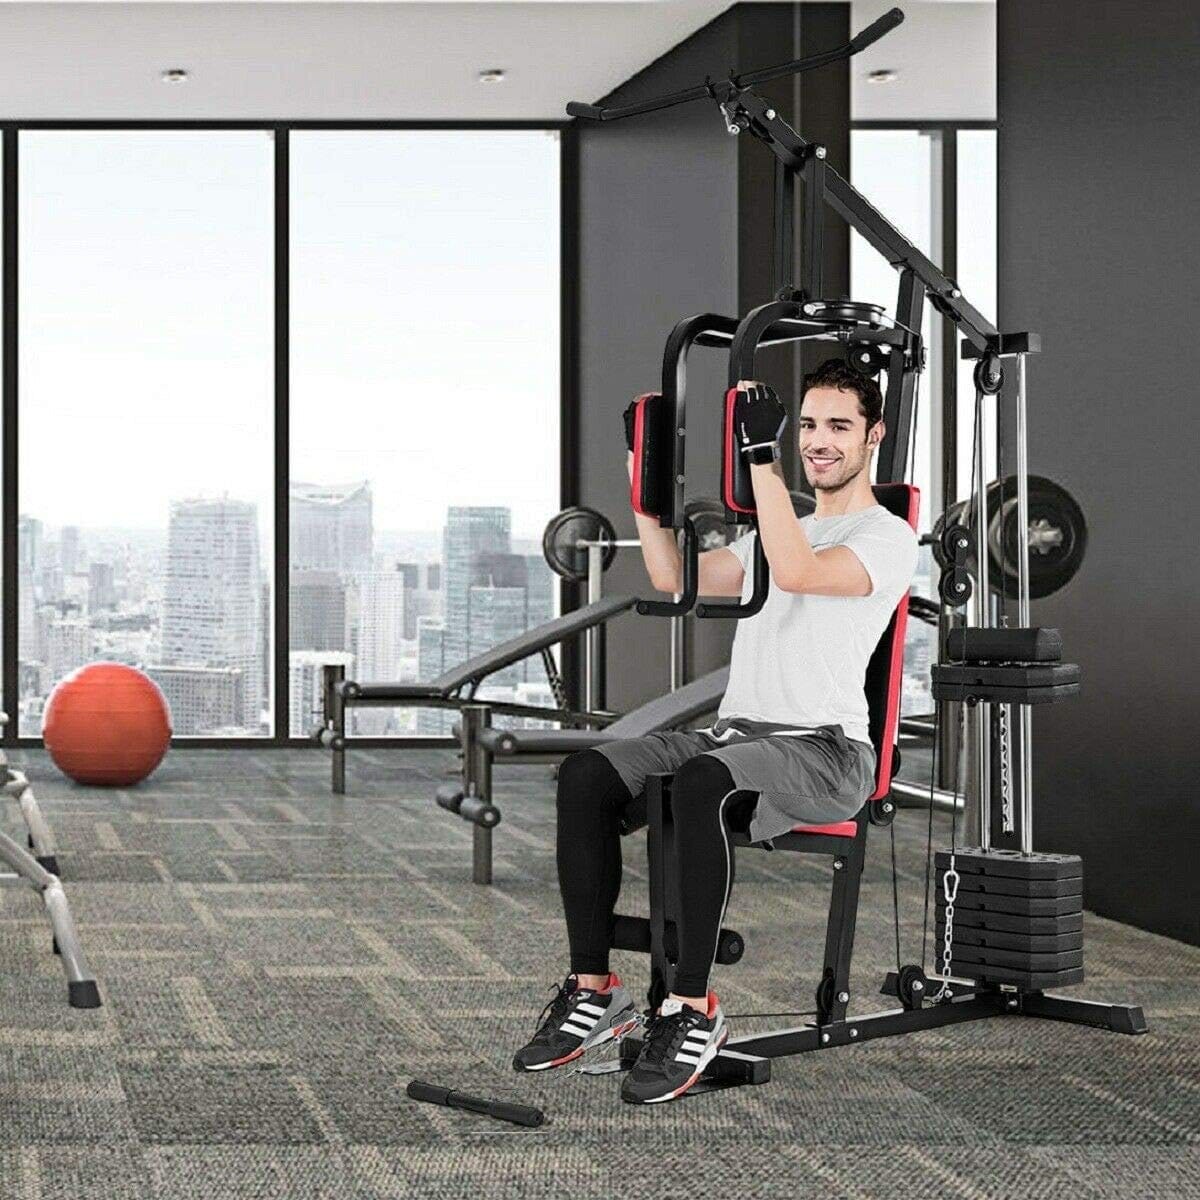 Read more about the article Comparing 3 Home Gym Systems: Strength, Fitness, and Leg Training